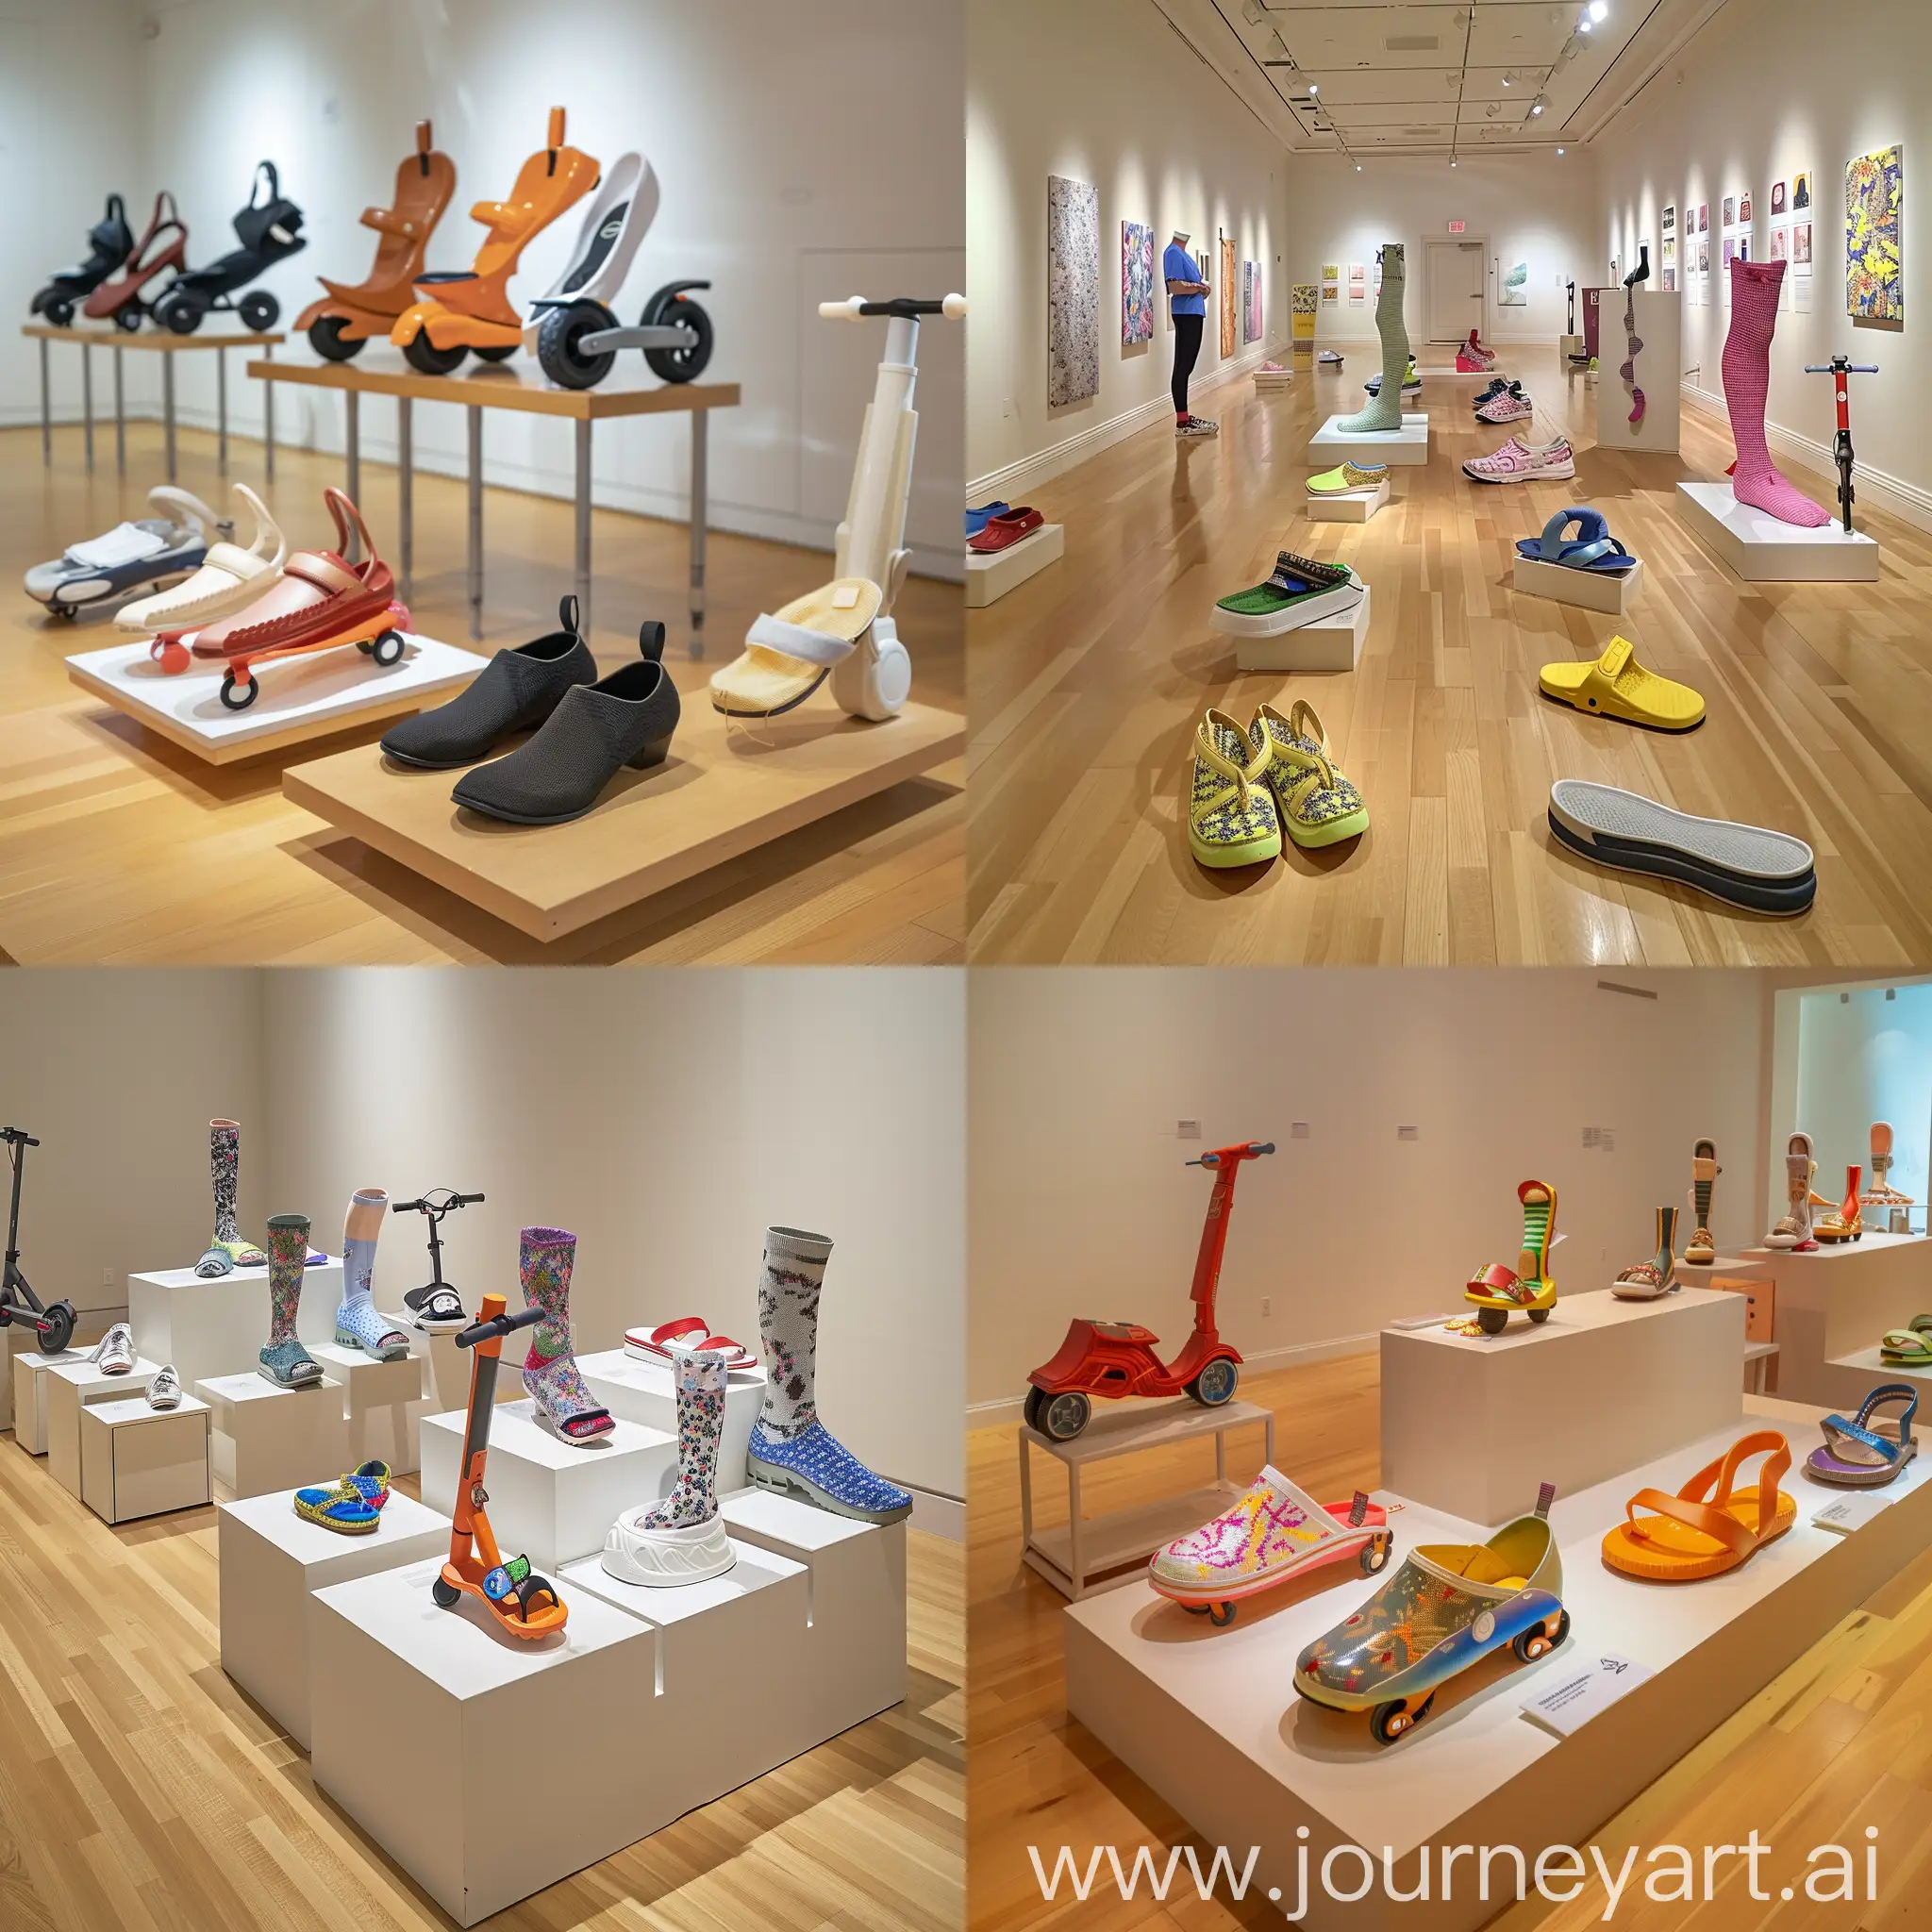 Create an image of a gallery that Set the stage for “putting yourself in someone’s shoes” by choosing to wear from a variety of shoes other than yours: scooters, sneakers, Birkenstock, hospital slippers, compression stockings etc. 